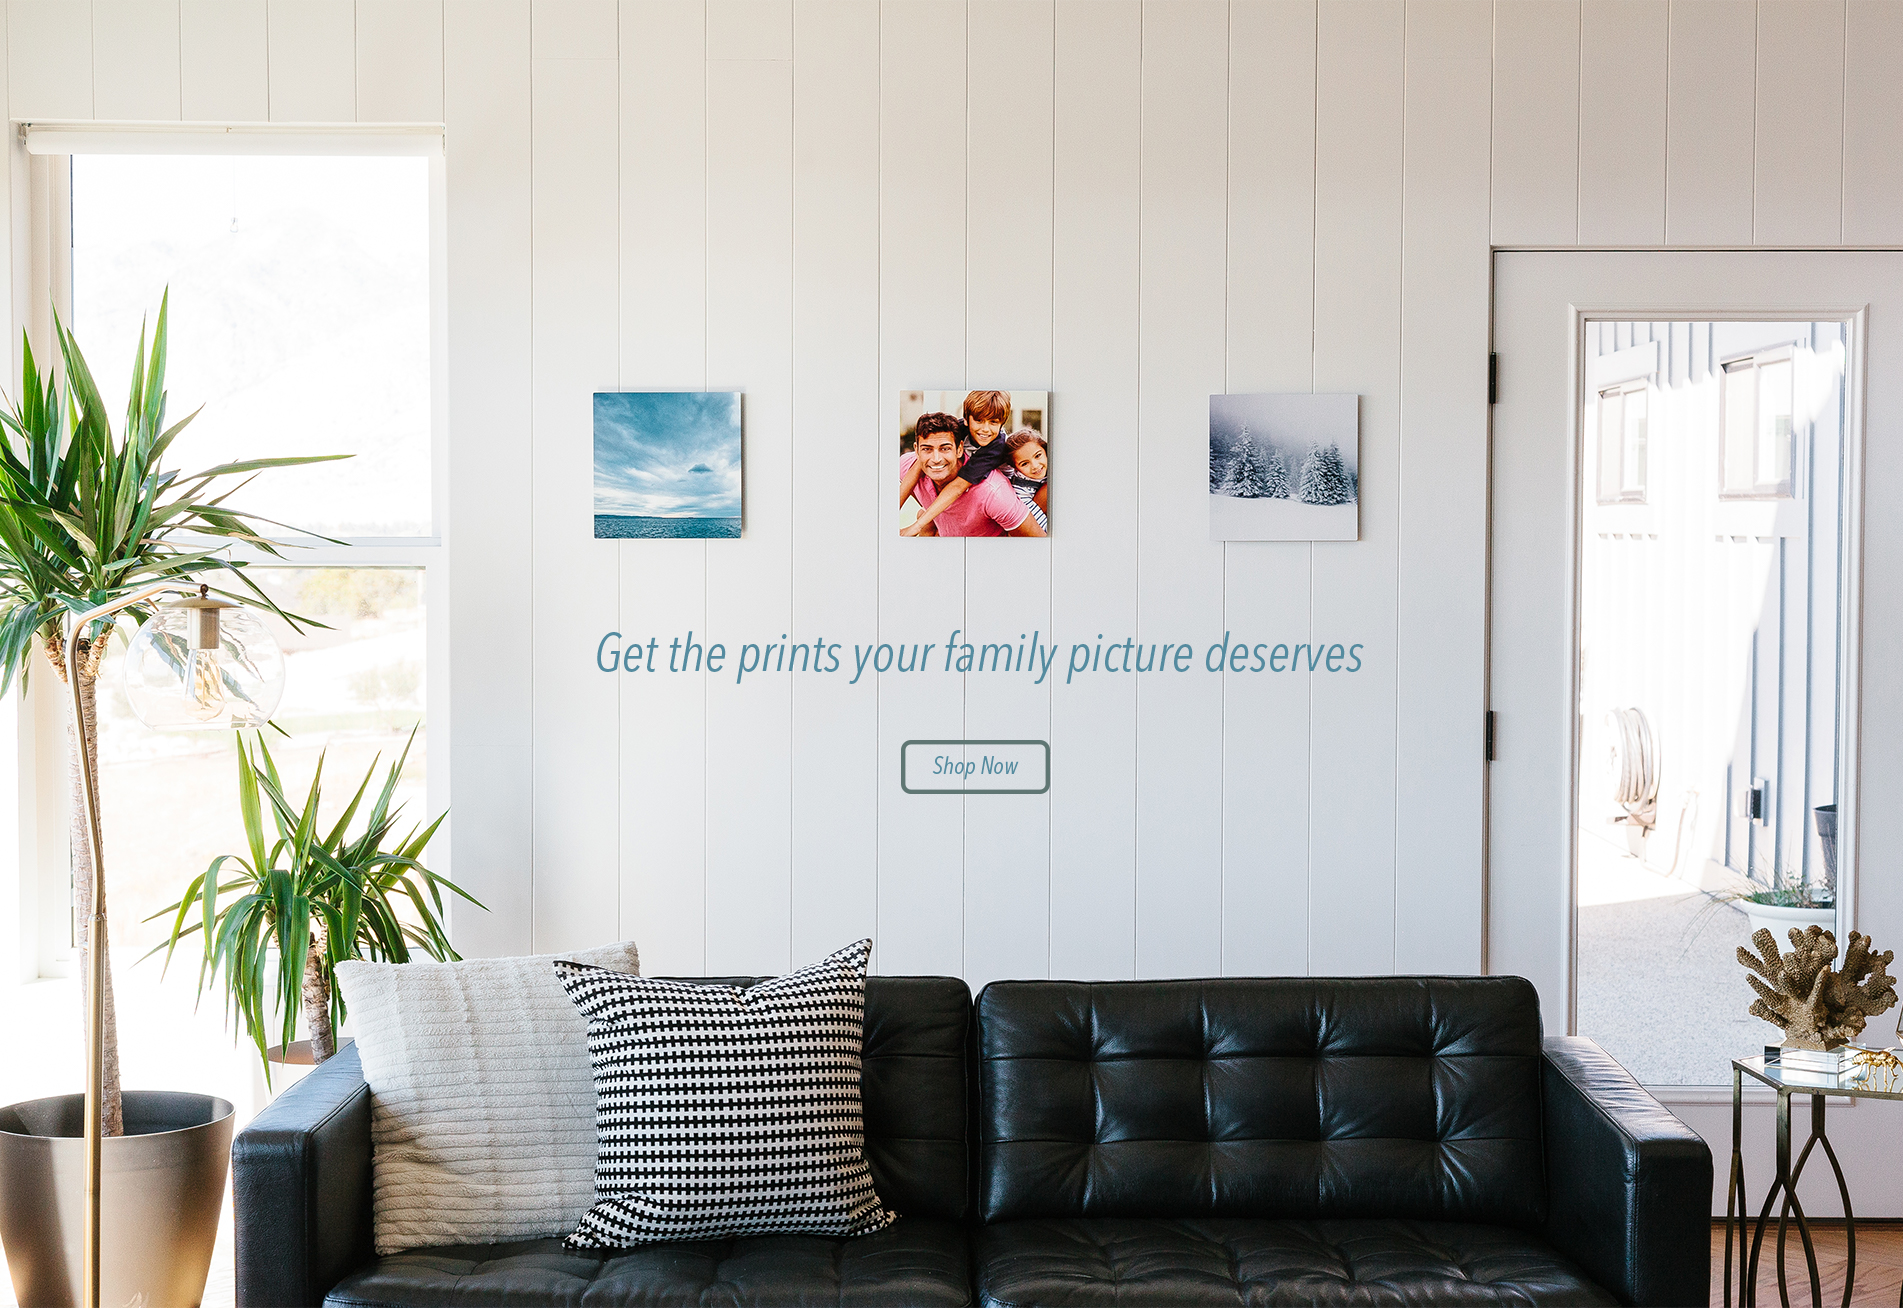 Get excited about printing photos again